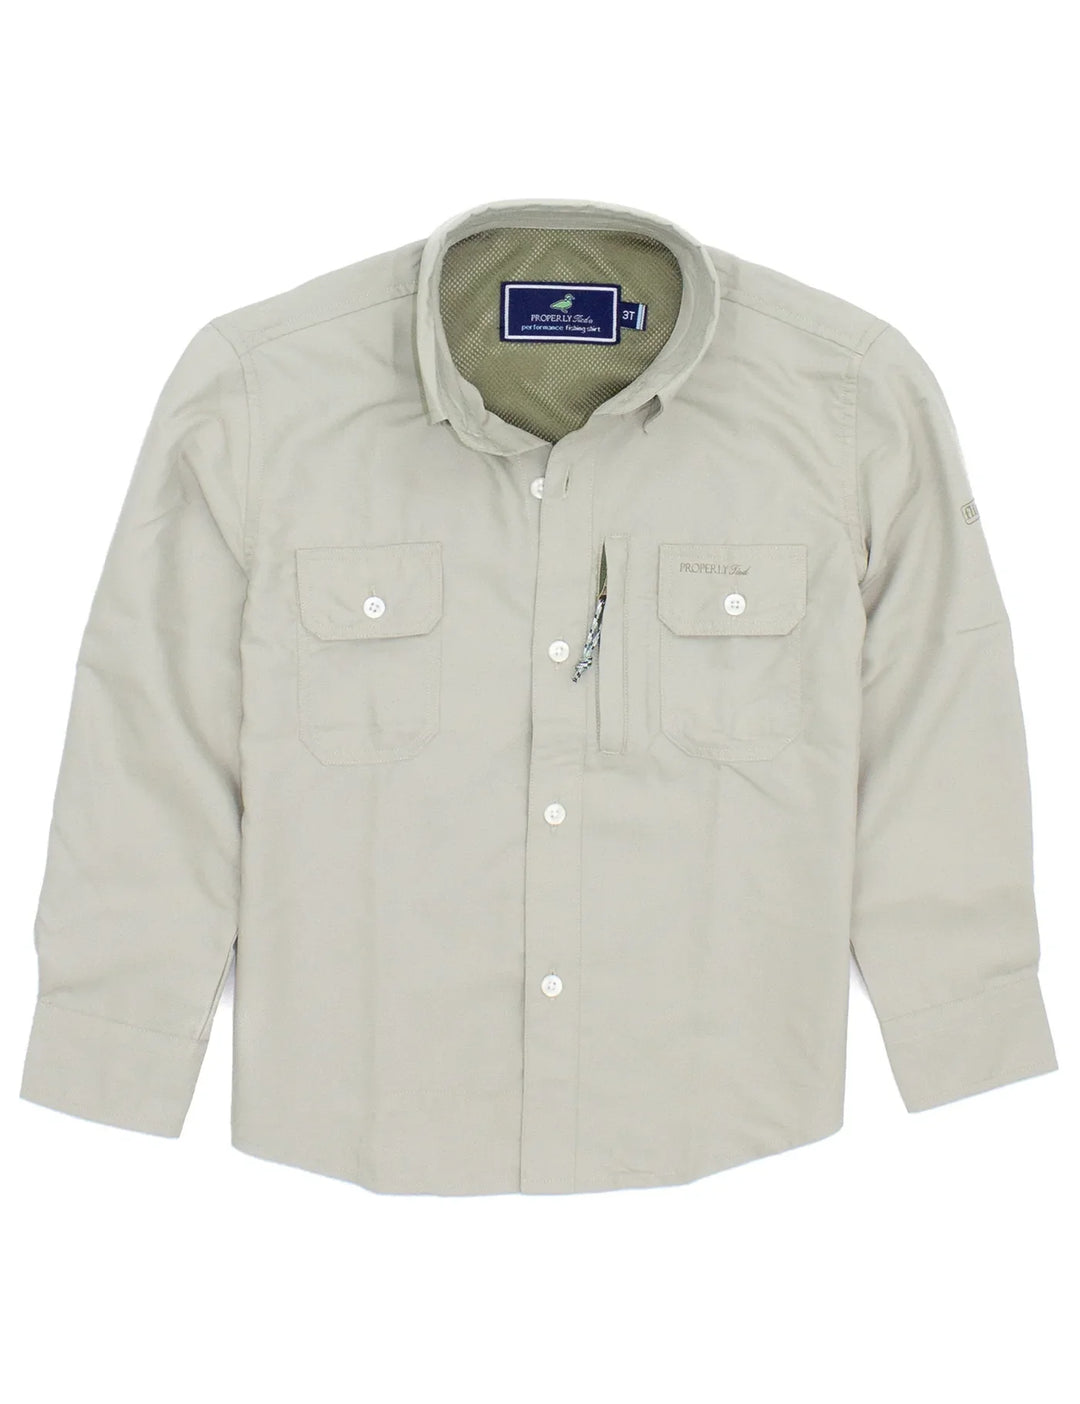 Properly Tied Offshore Fishing Shirt